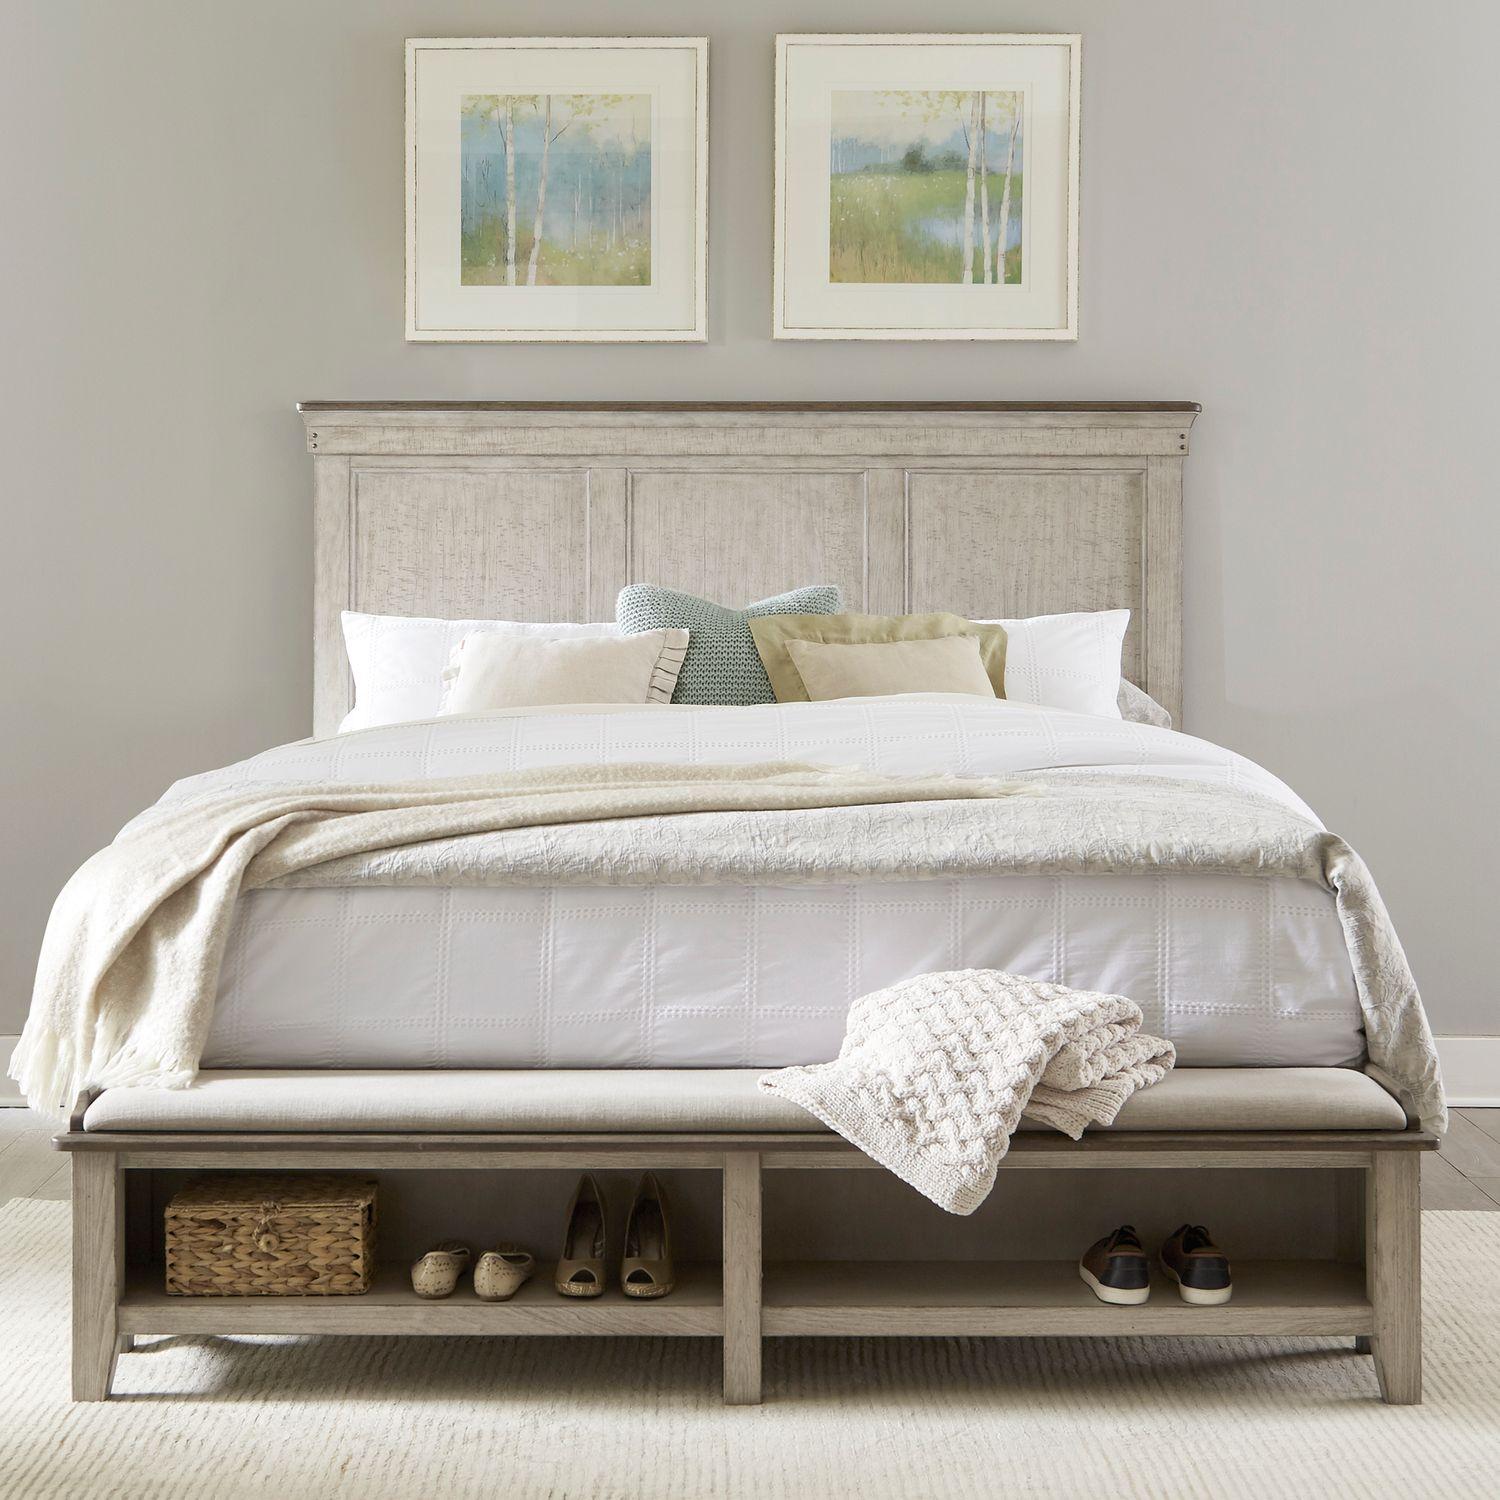 Contemporary, Cottage Storage Bed Ivy Hollow (457-BR) 457-BR-KSB in Taupe 